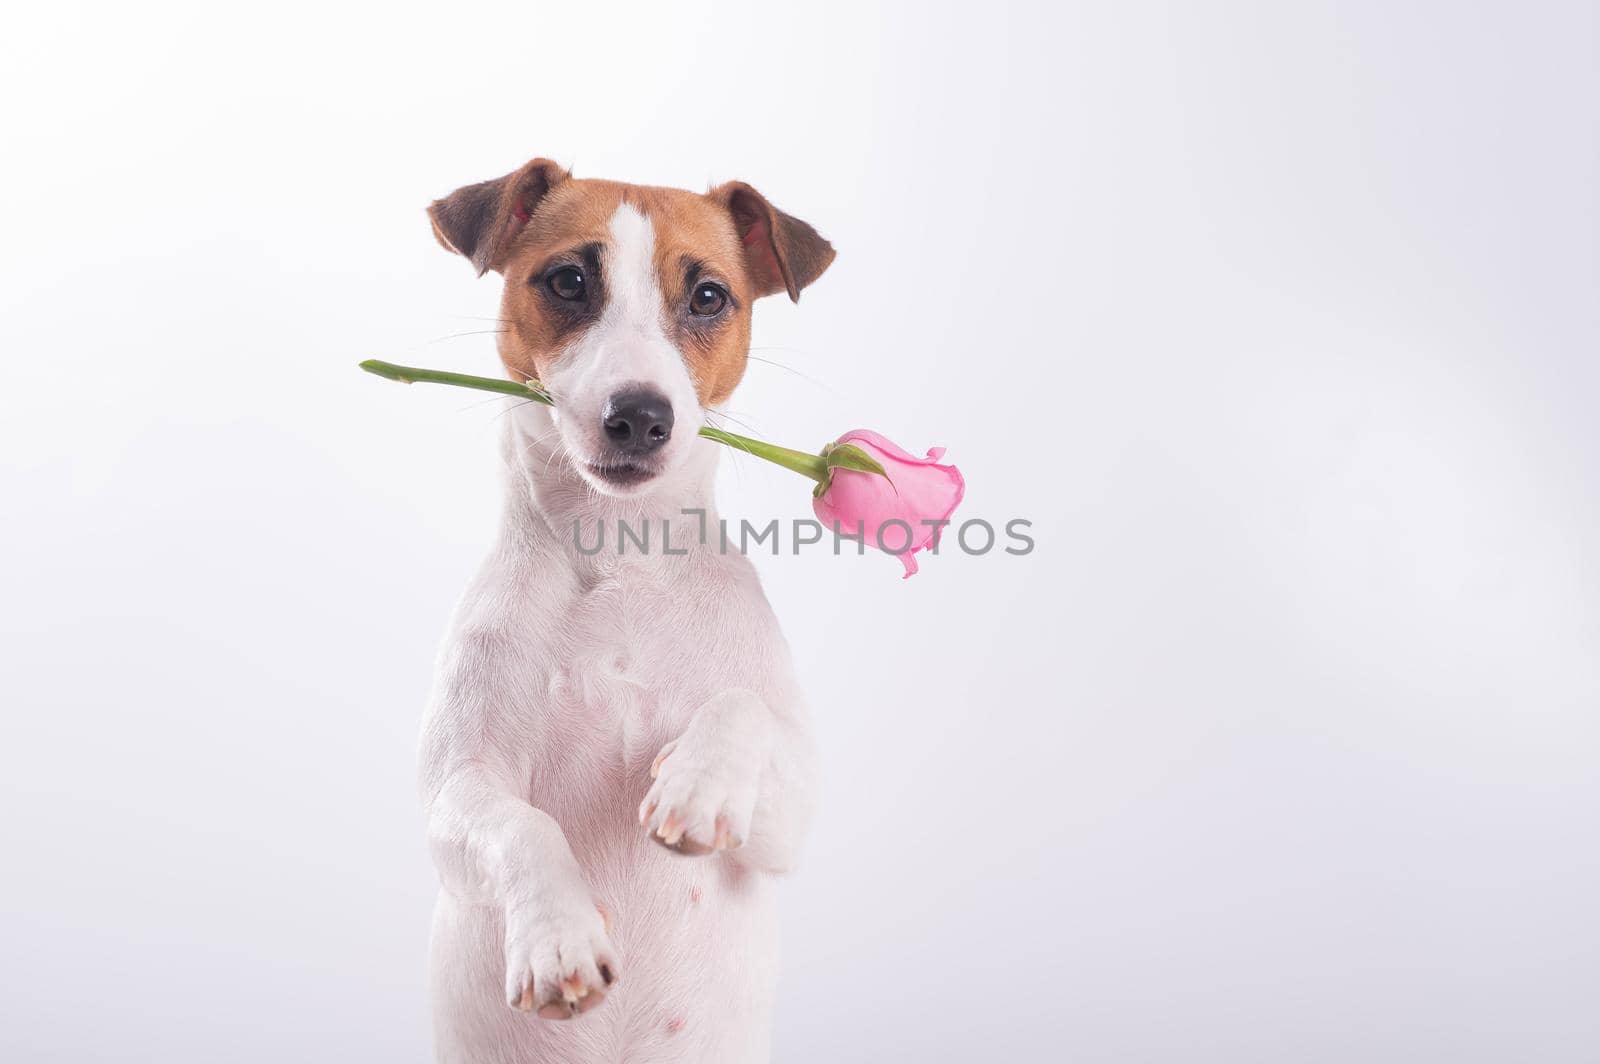 Jack Russell Terrier holds flowers in his mouth on a white background. A dog gives a romantic gift on a date by mrwed54